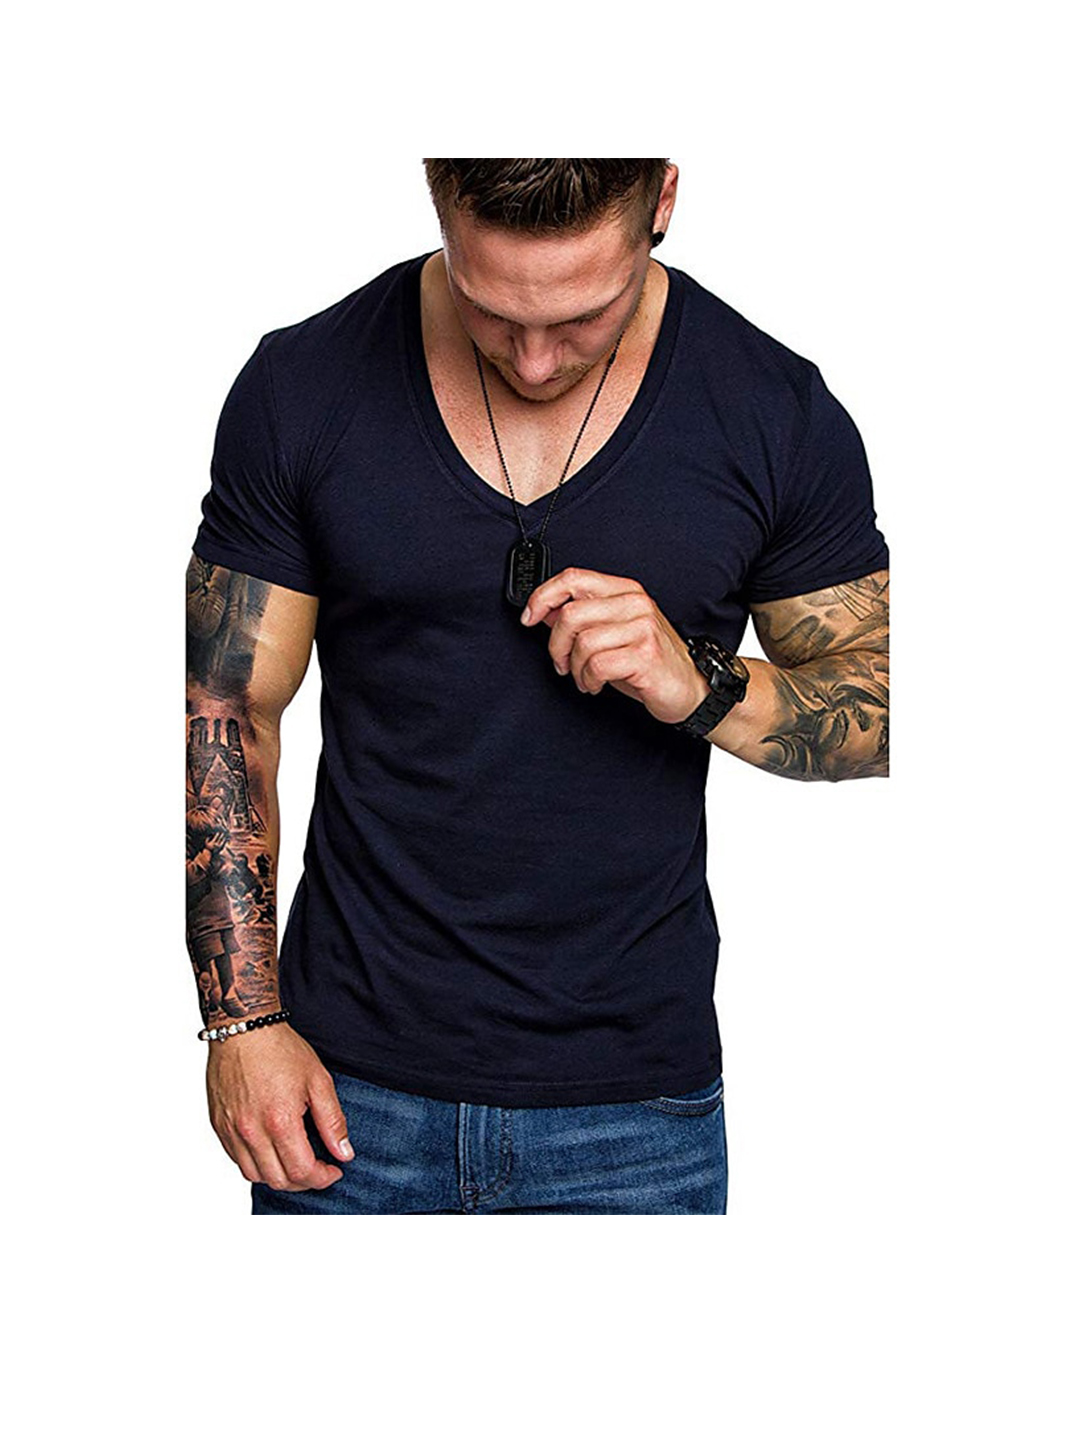 William V-Neck Solid Color Casual T-Shirt